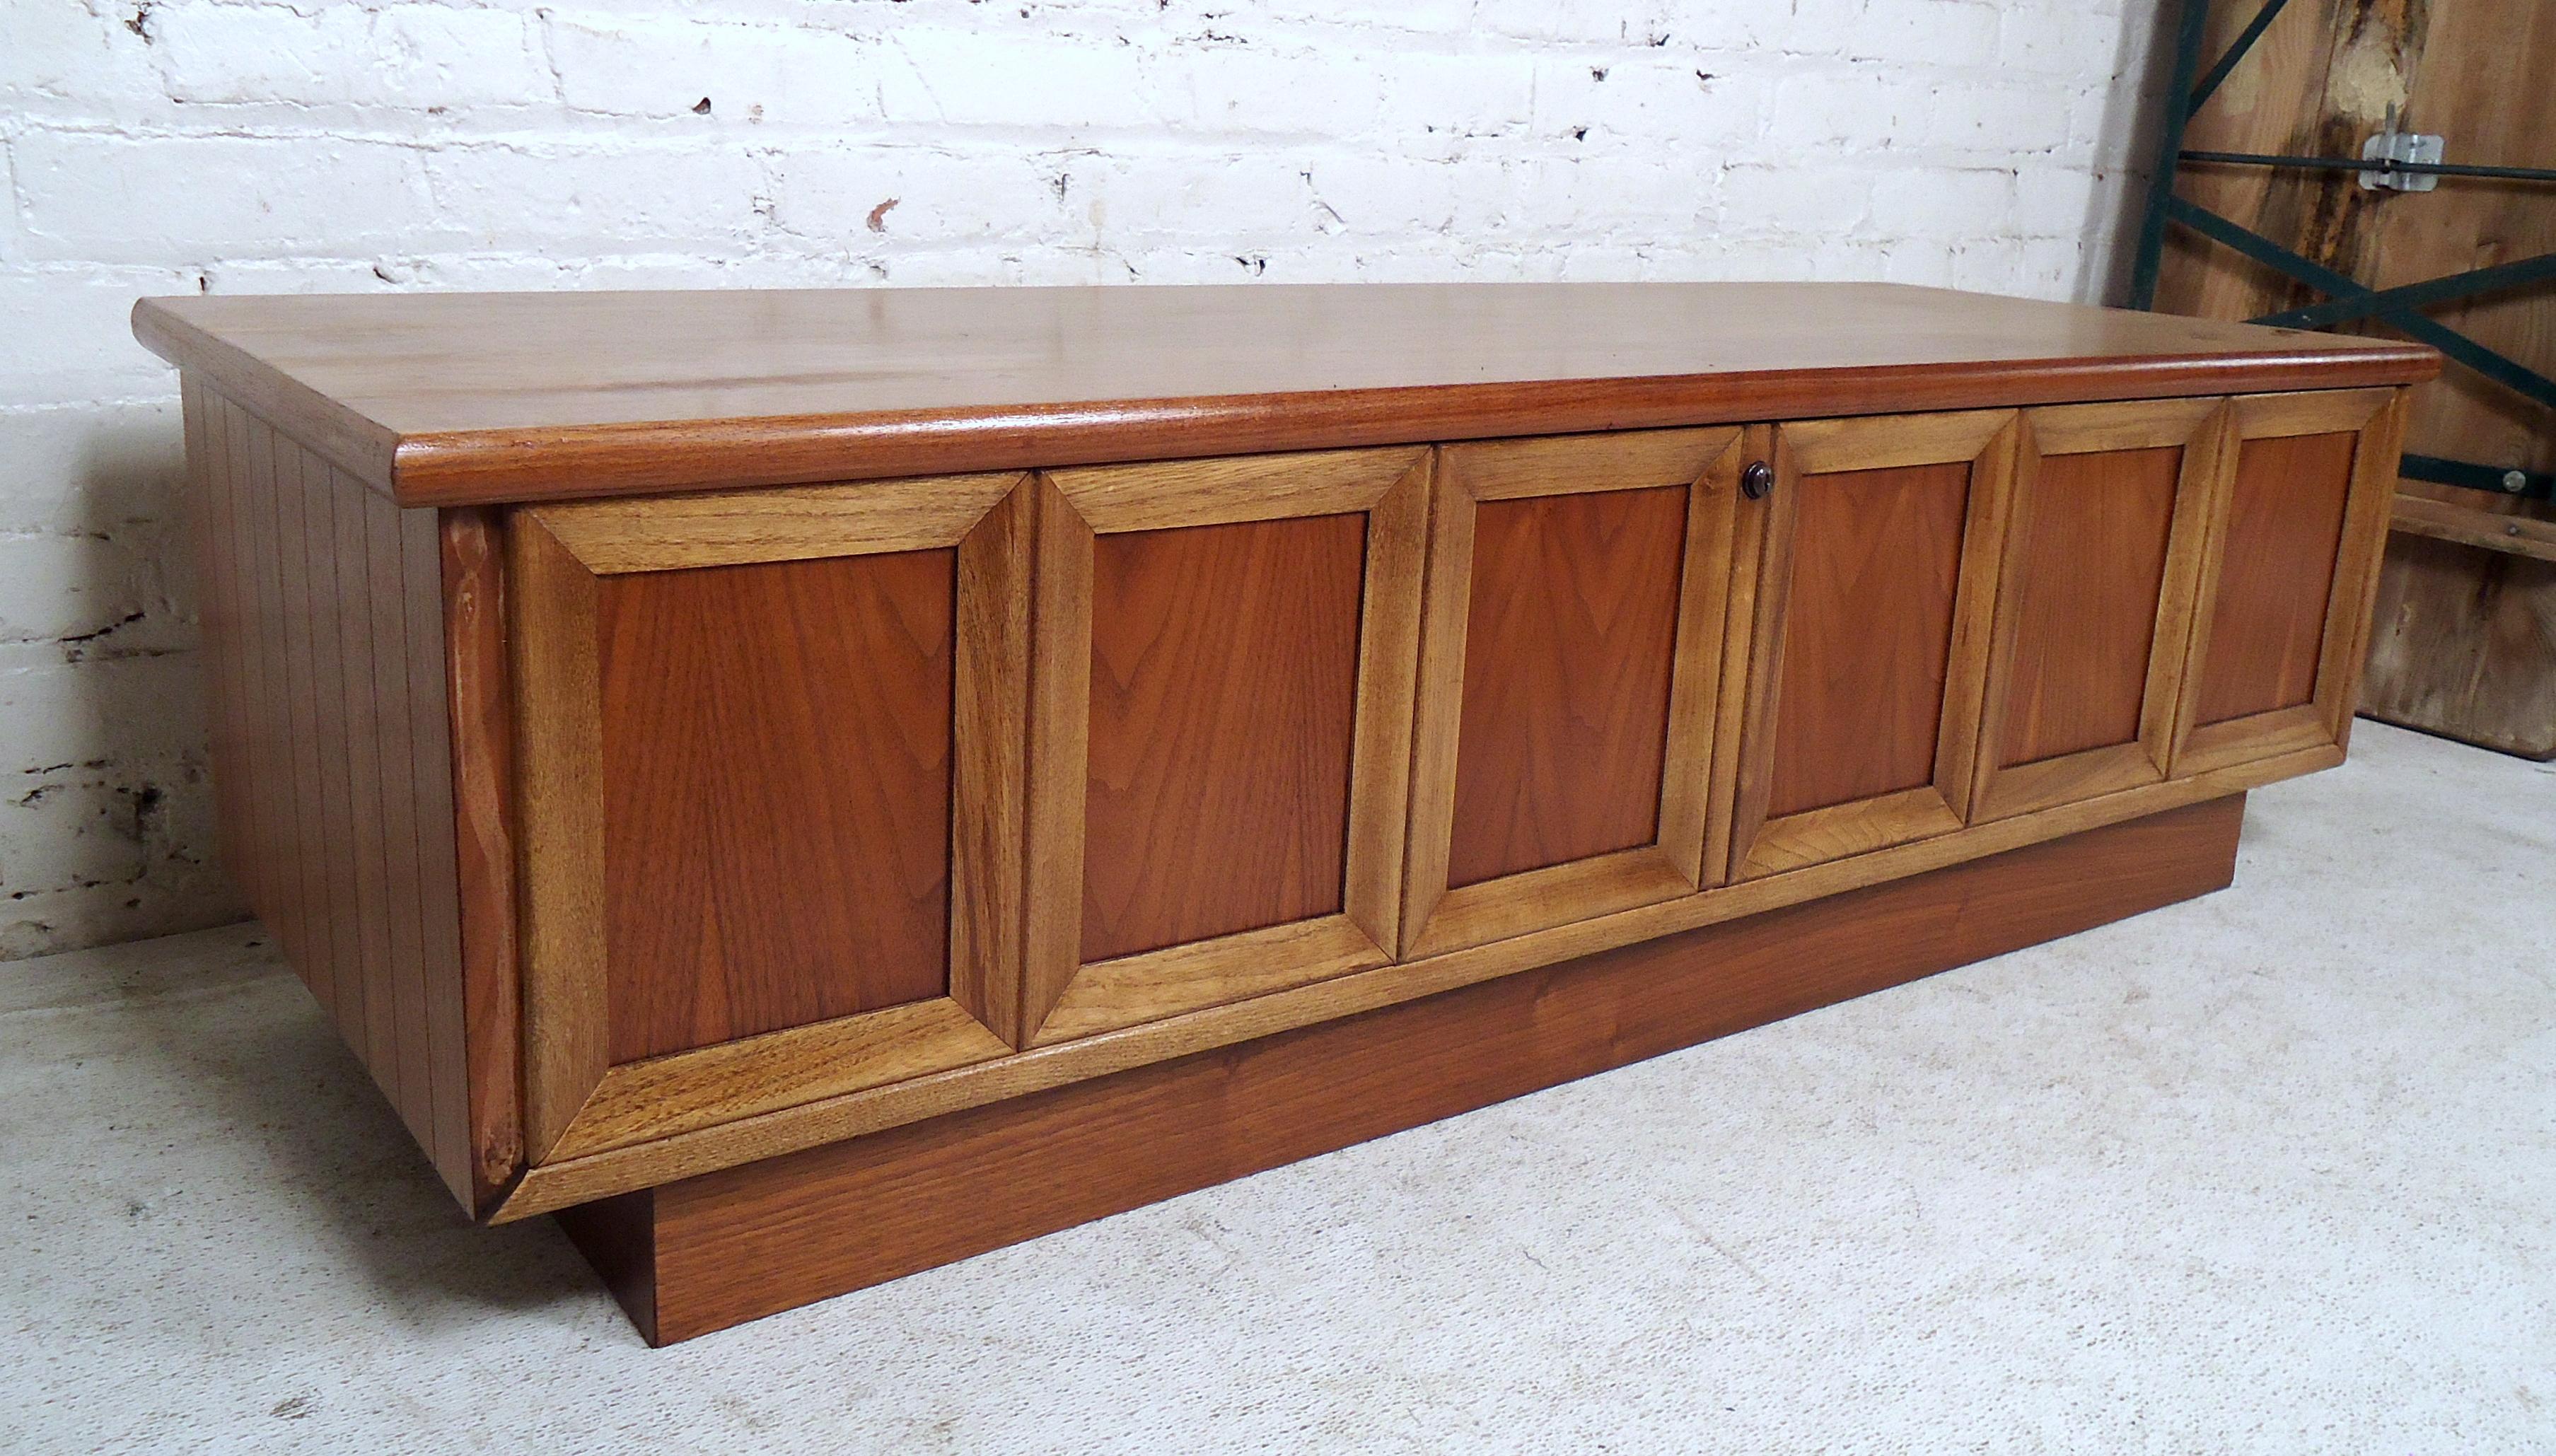 Vintage modern cedar chest by Lane features a large storage space for blankets, pillows, etc.

(Please confirm item location - NY or NJ - with dealer).